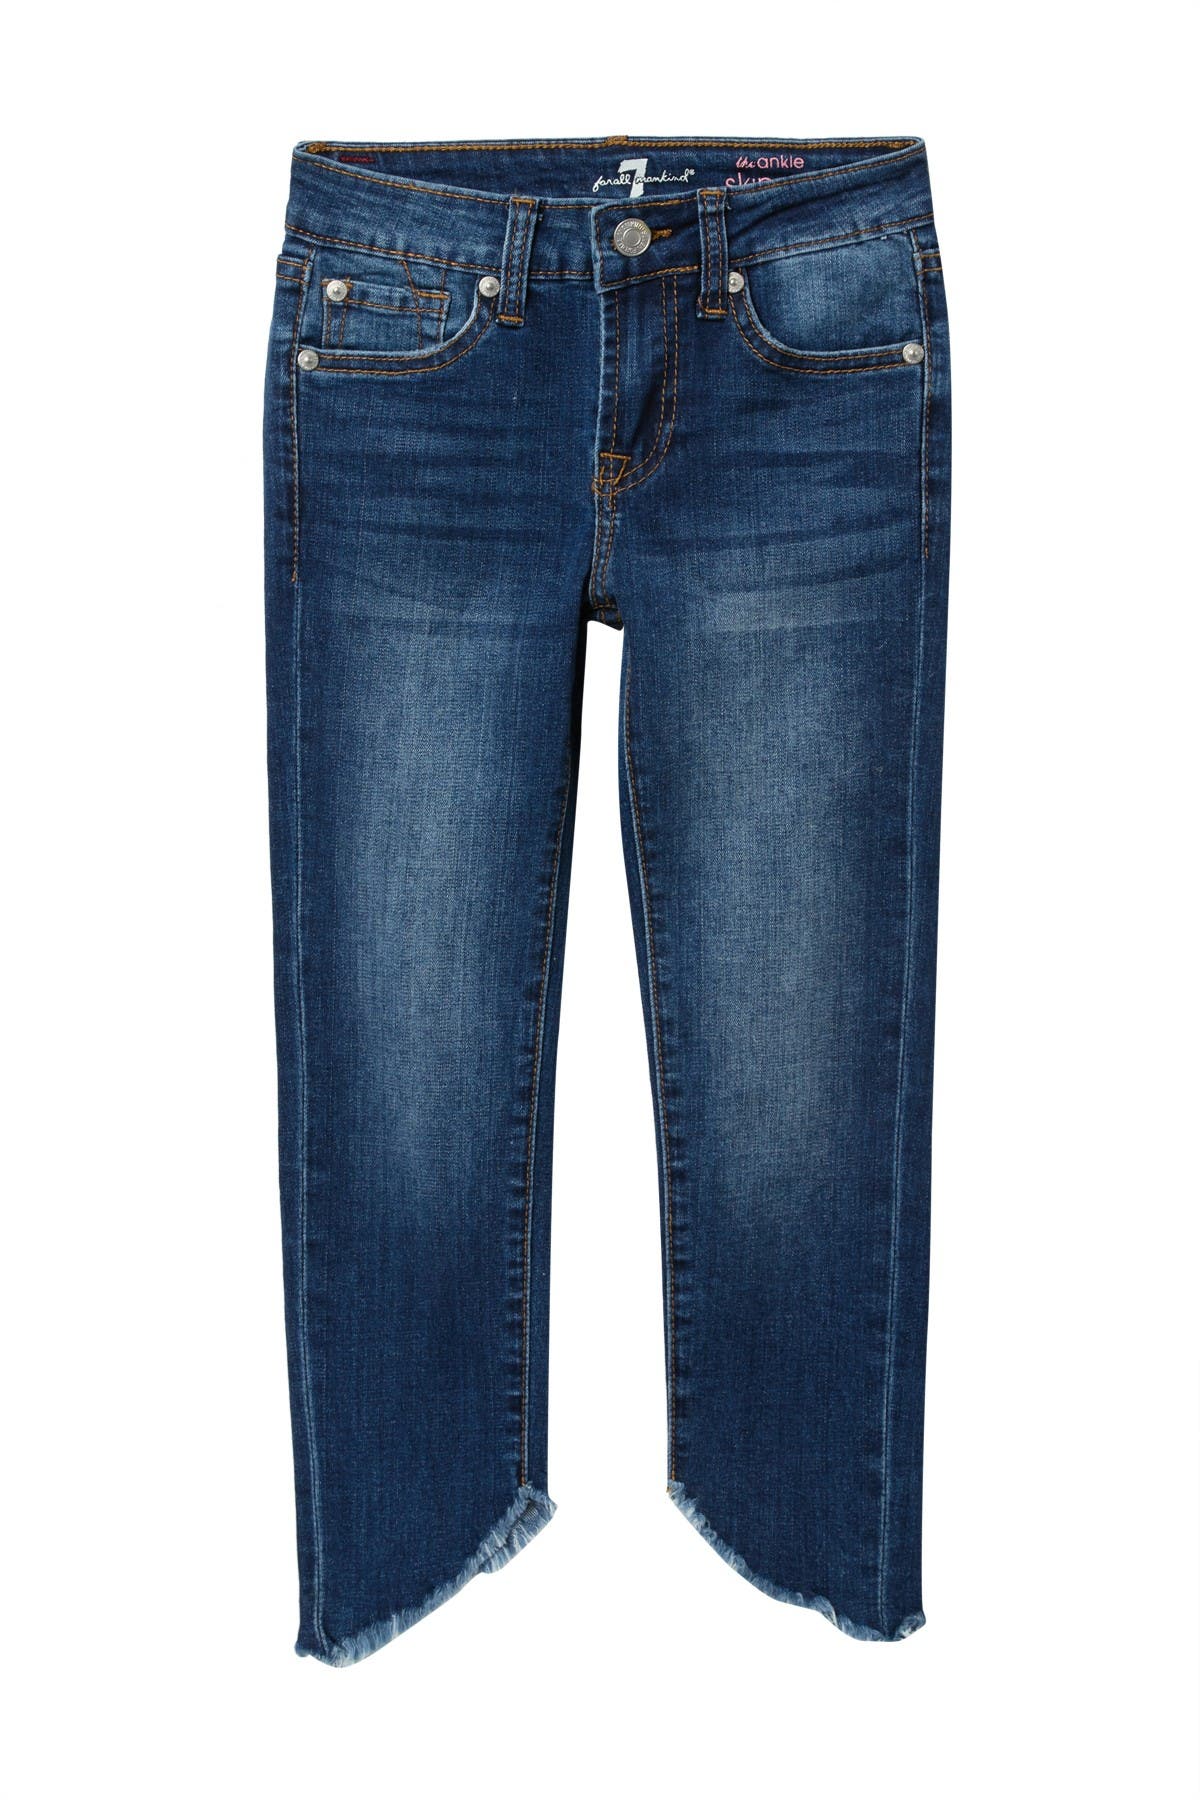 7 For All Mankind | The Ankle Skinny Jeans | Nordstrom Rack